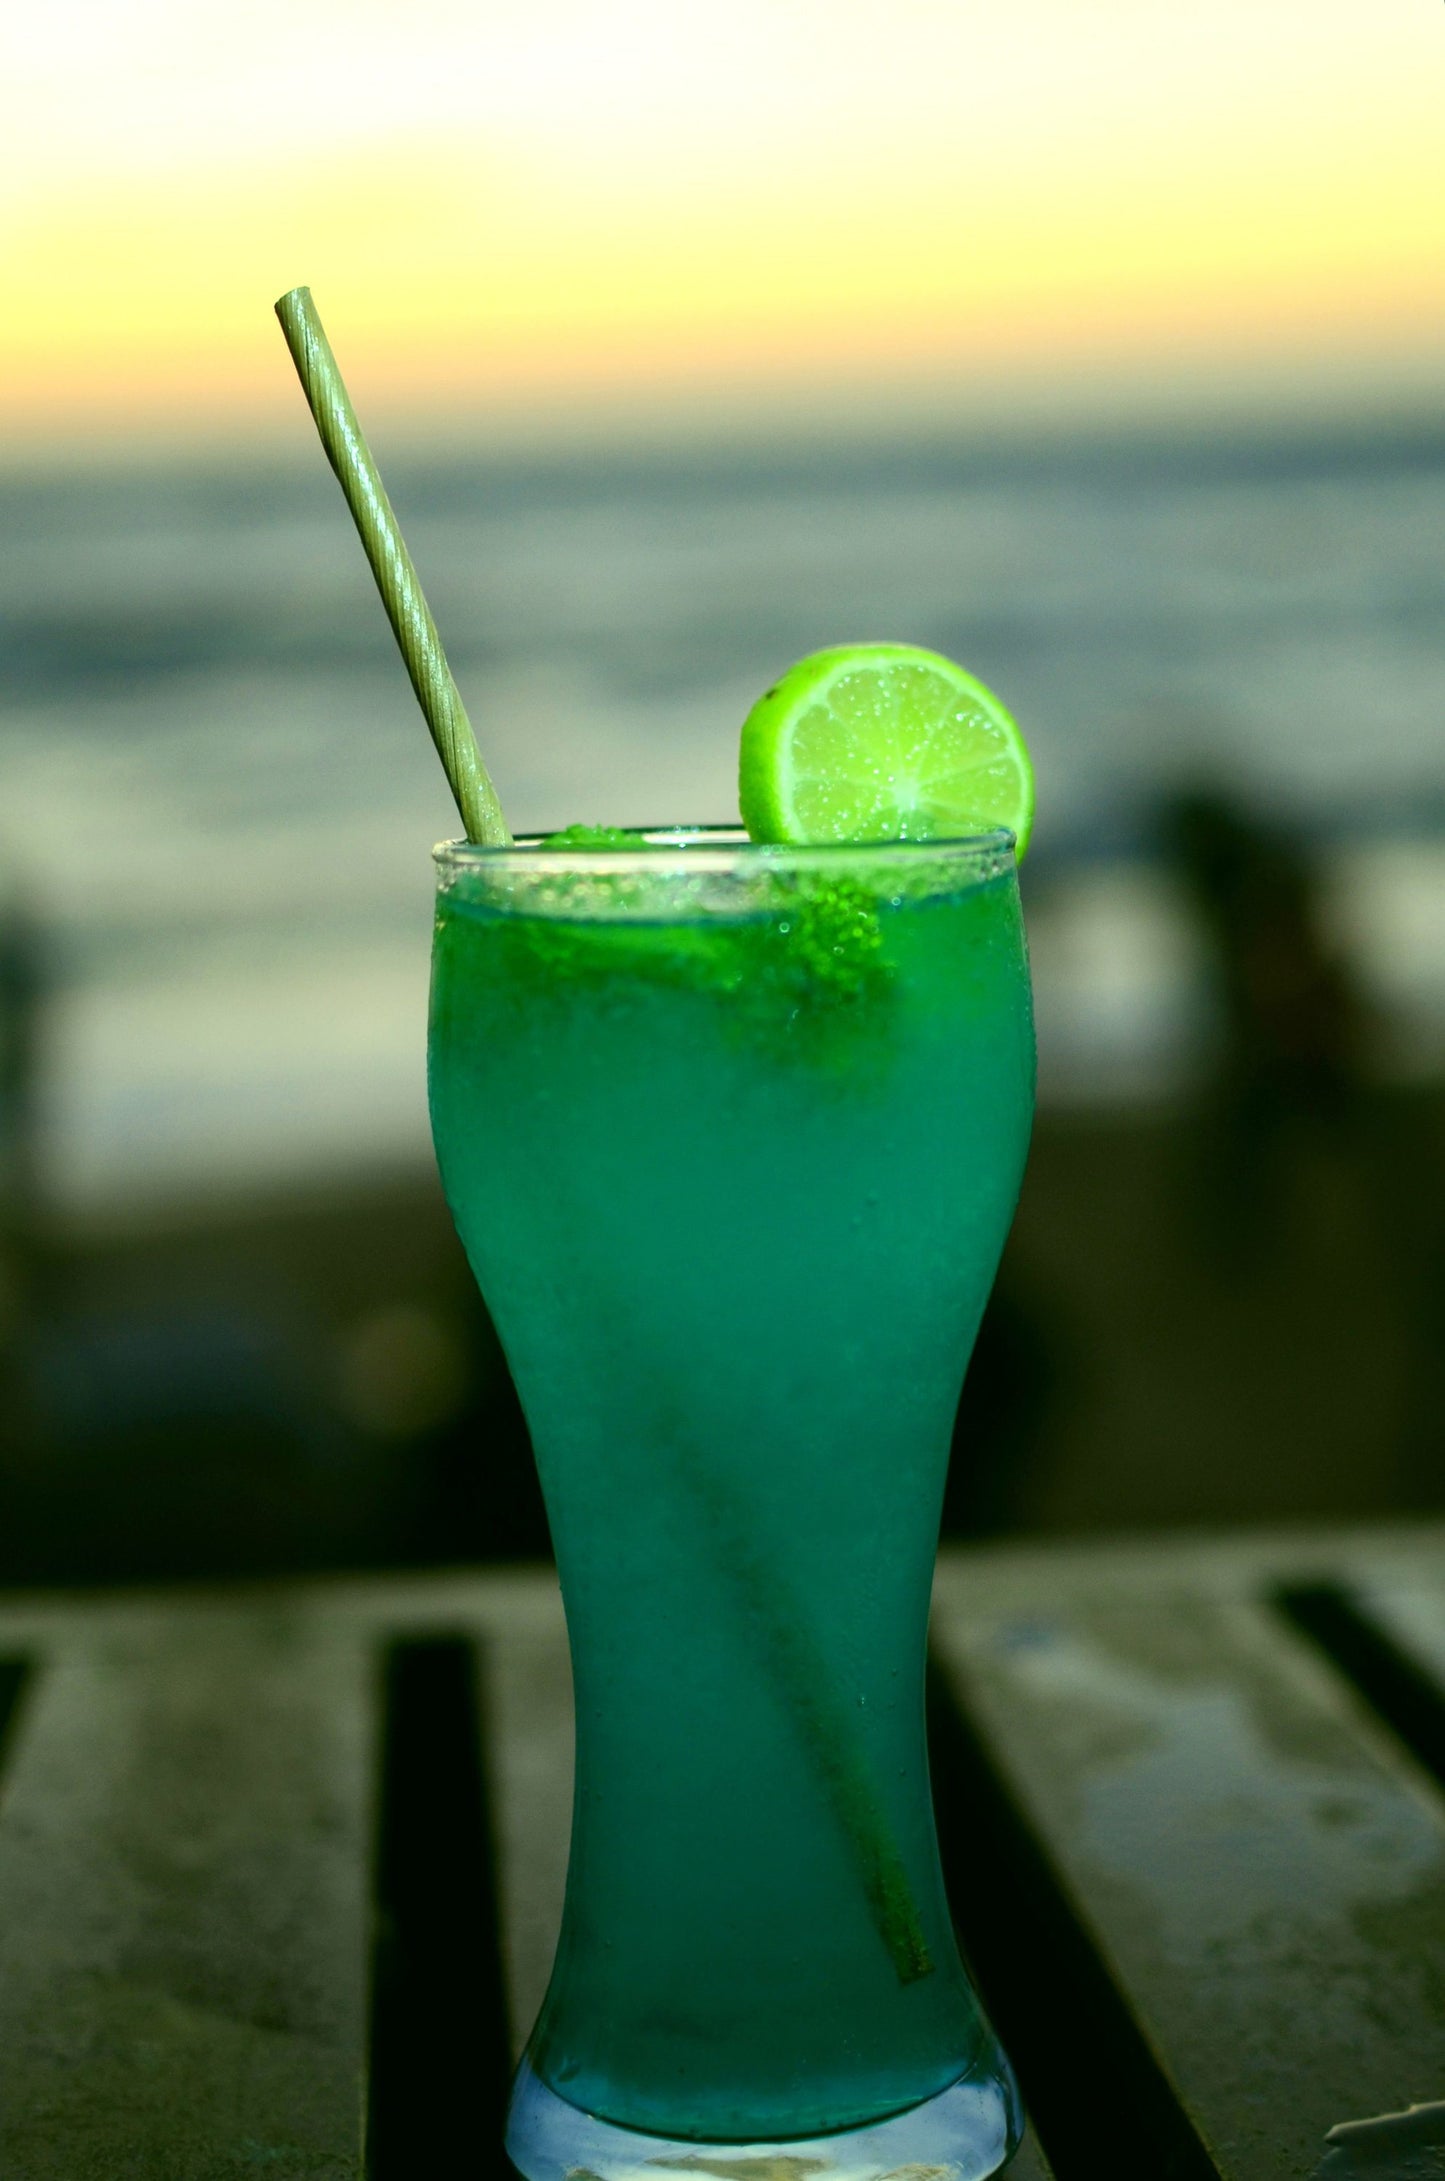 Straw in a tropical beverage